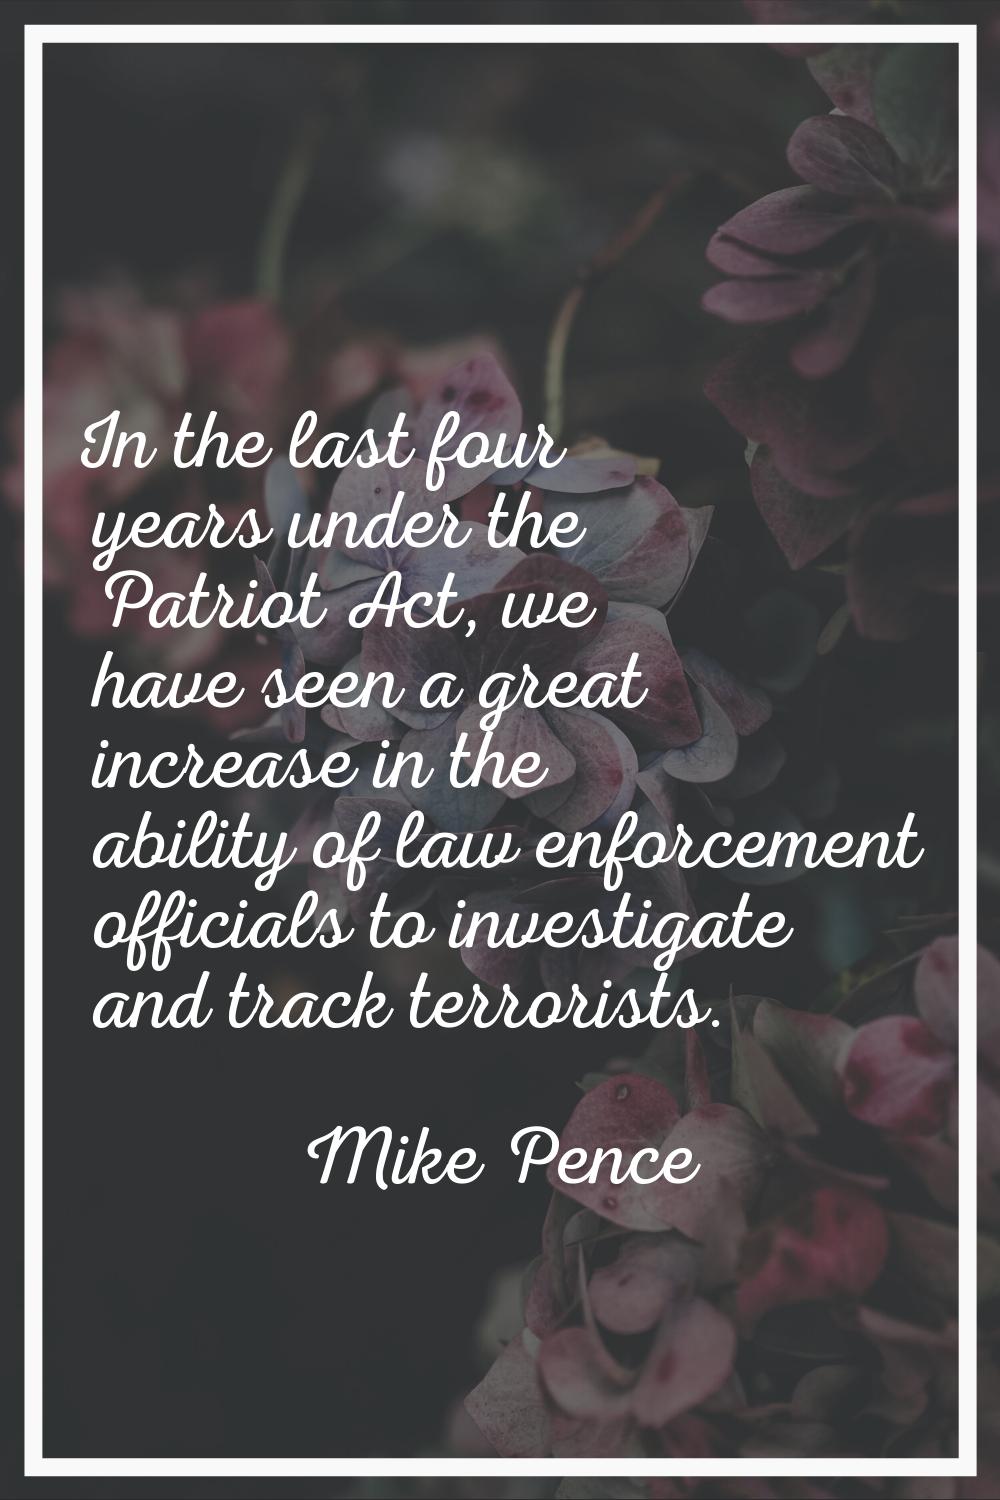 In the last four years under the Patriot Act, we have seen a great increase in the ability of law e